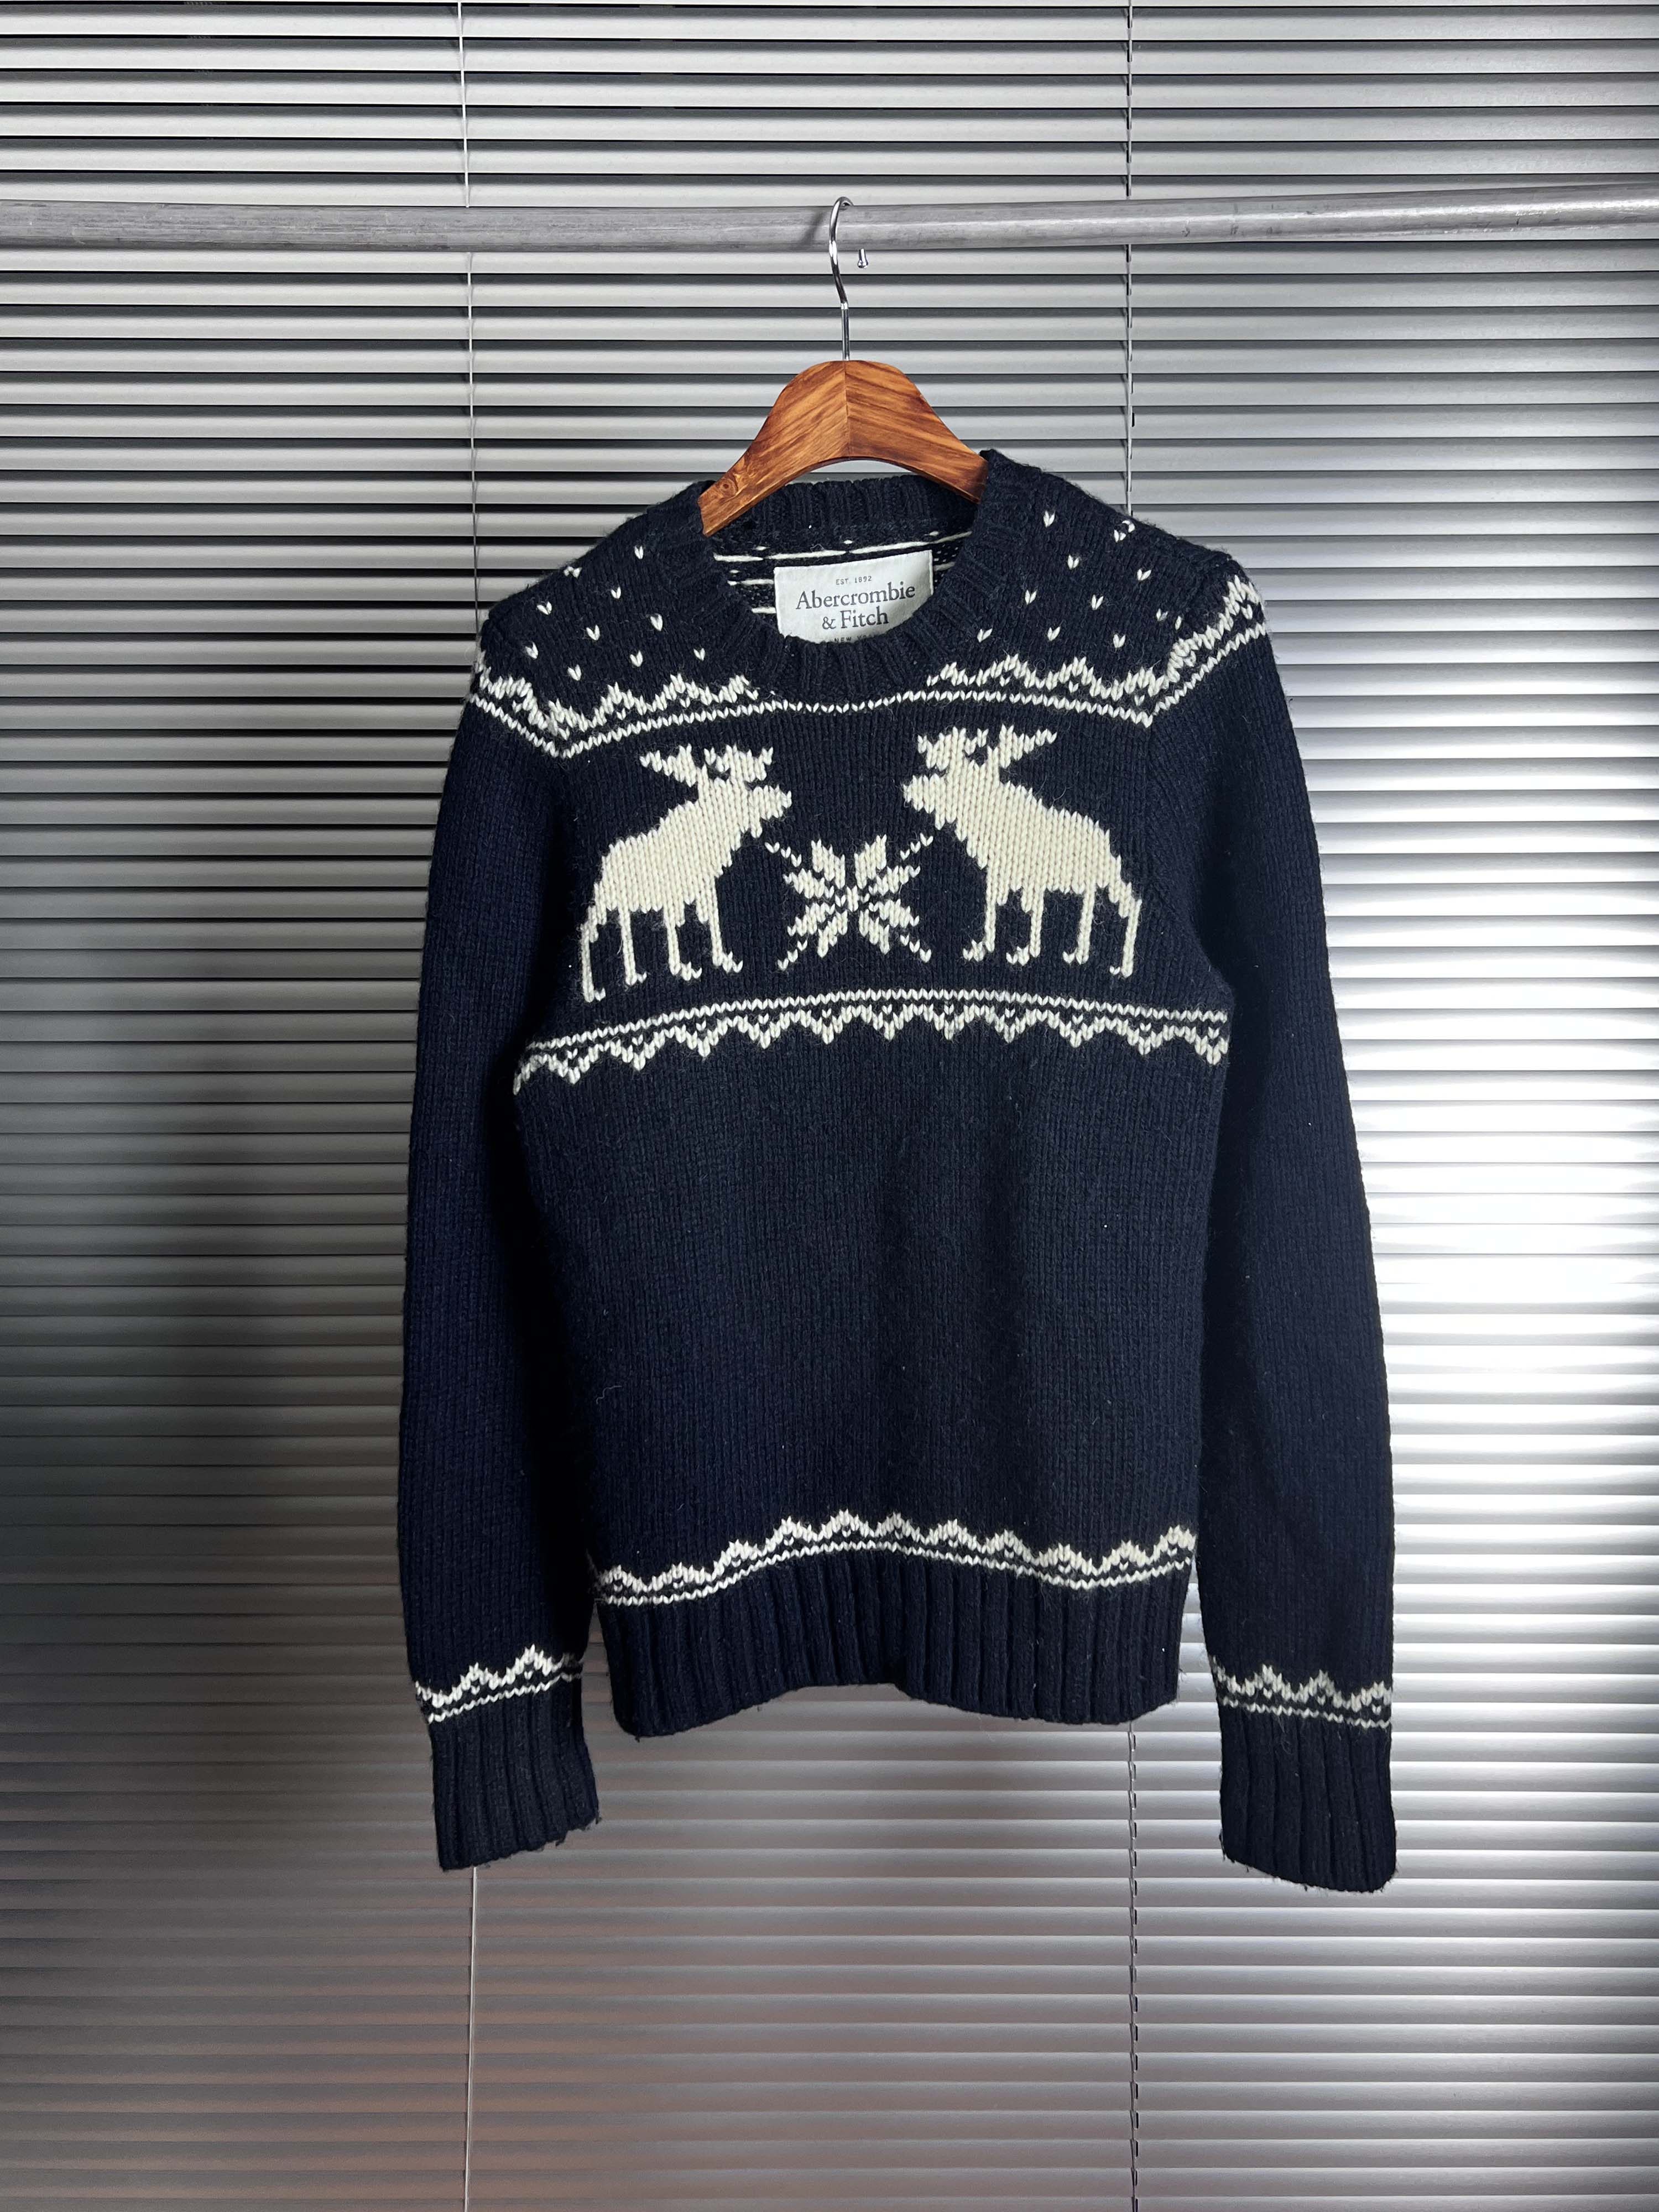 Abecrombie &amp; Fitch nordic knit